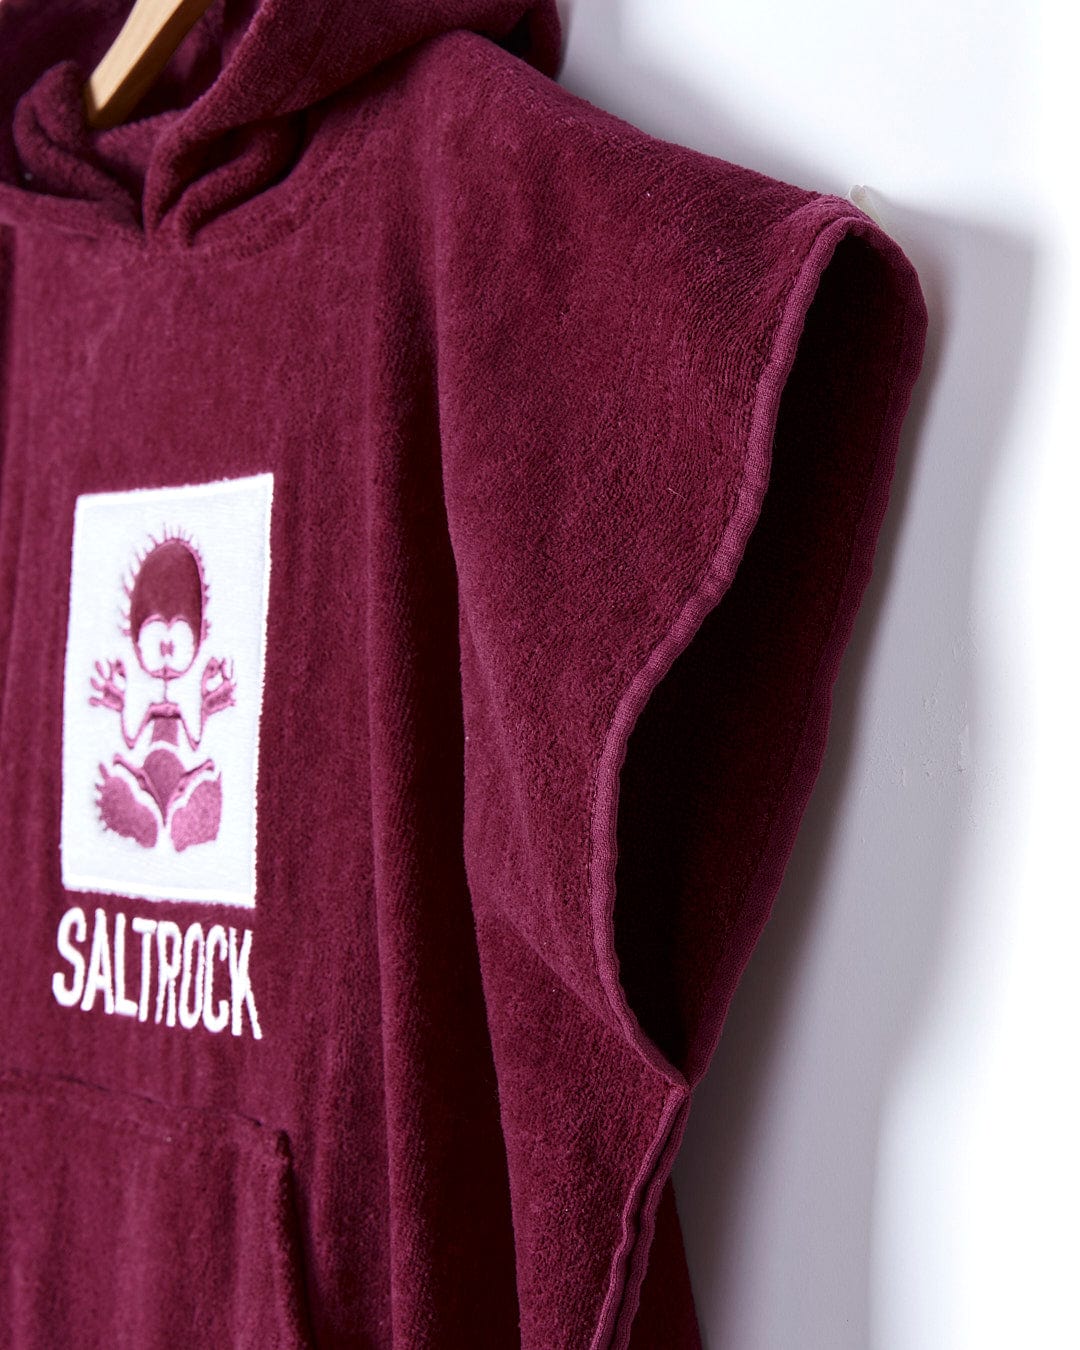 A Saltrock hoodie with a picture of a boy on it.